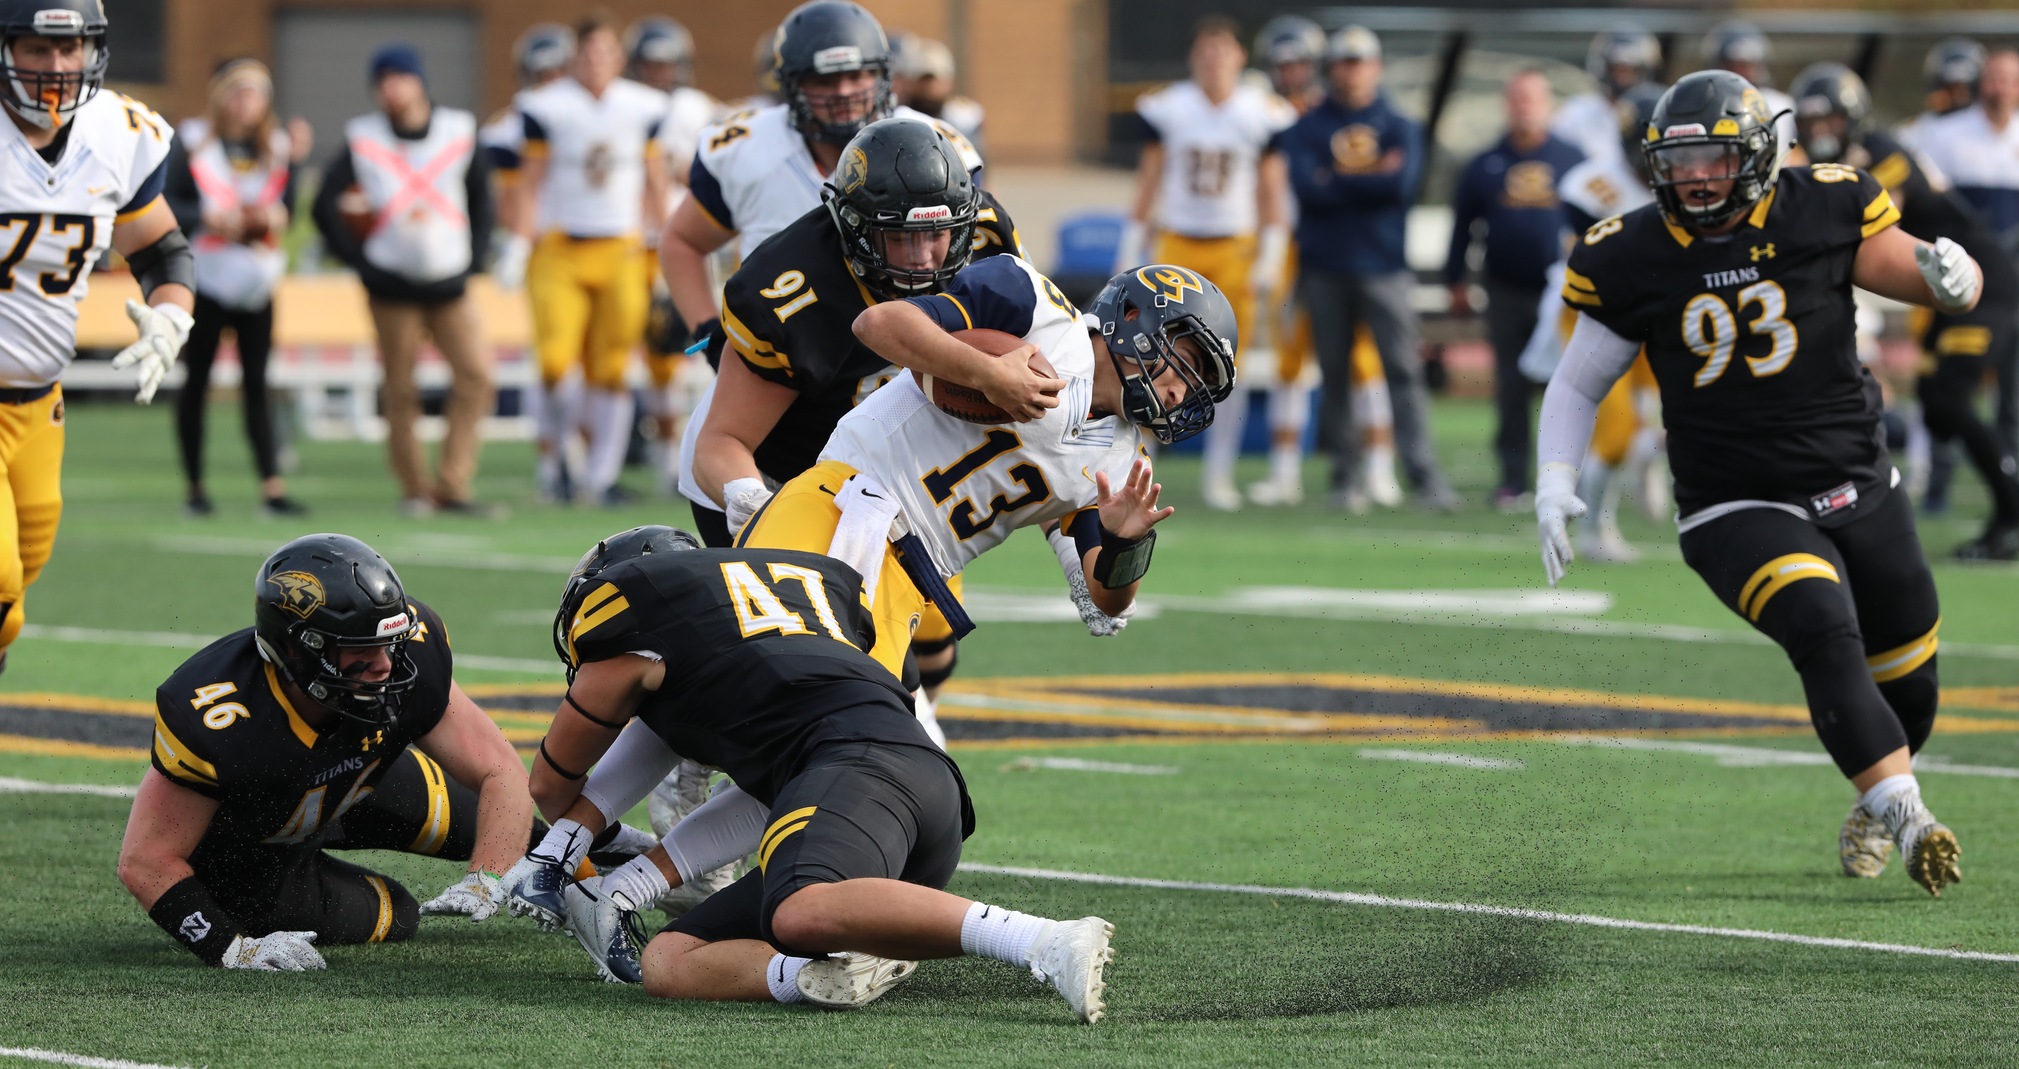 Tory Jandrin (47), Brandon Kolgen (91) and Trenton LaCombe (93) combined for 14 tackles and four of UW-Oshkosh's eight sacks against the Blugolds.